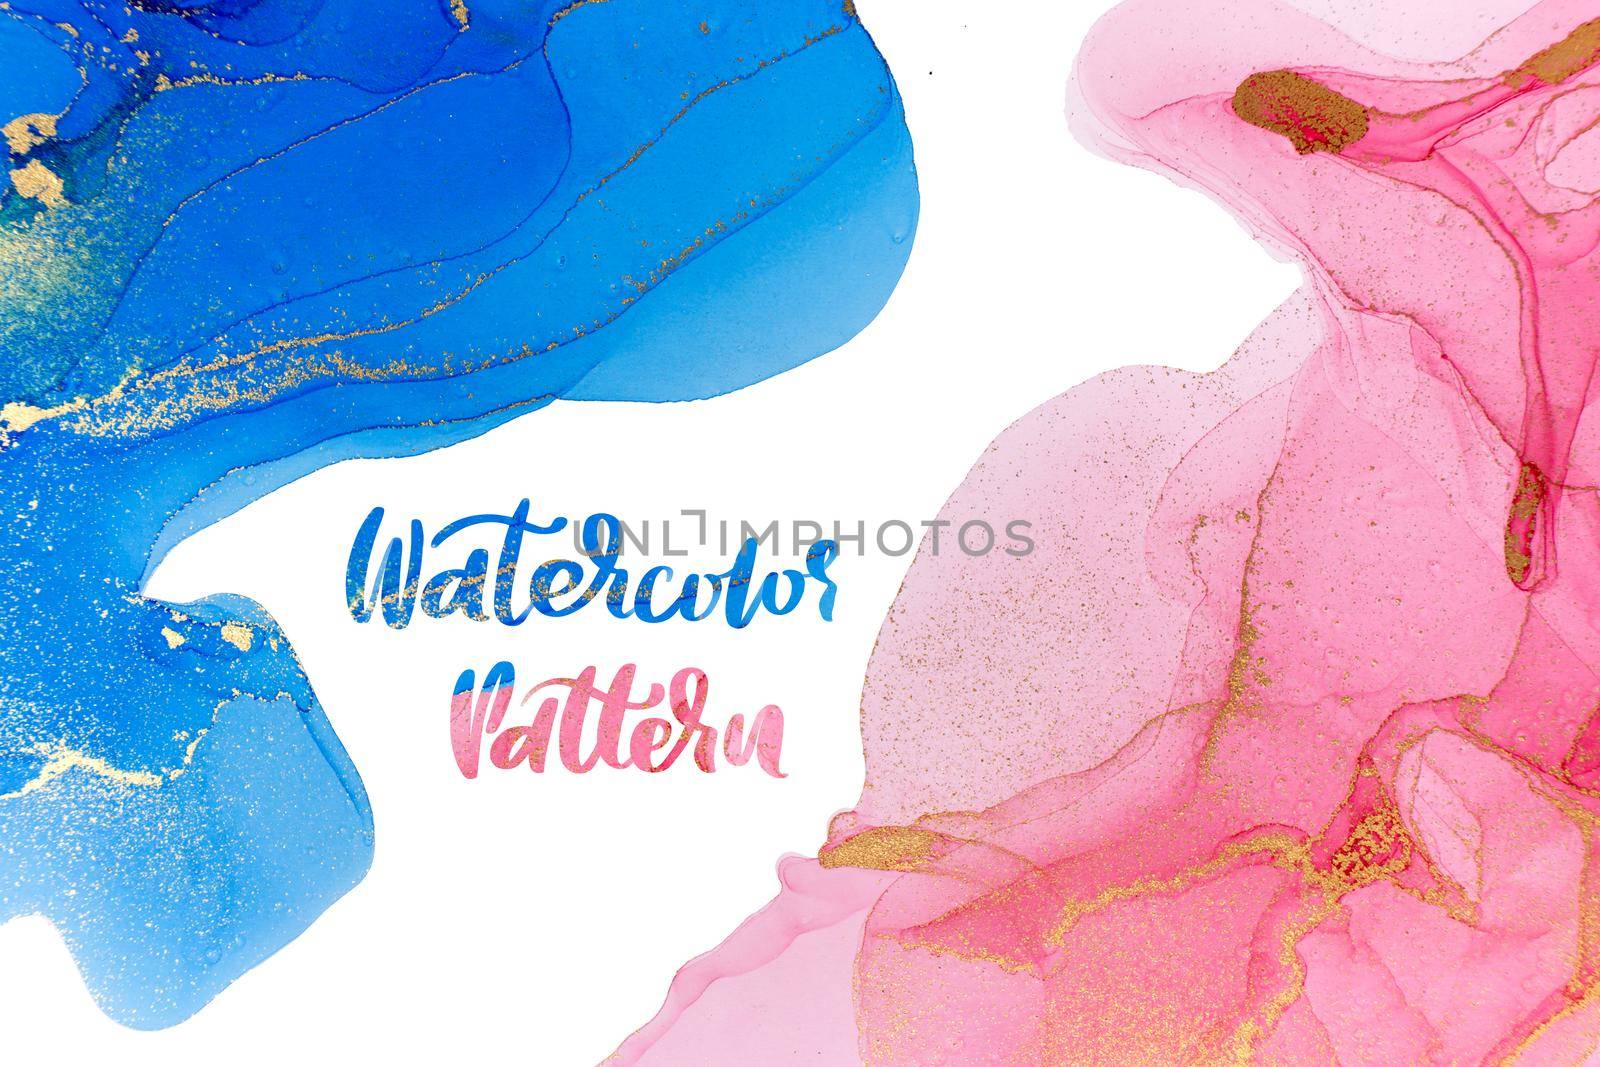 Abstract blue and pink watyercolor pattern with copyspace. Template design